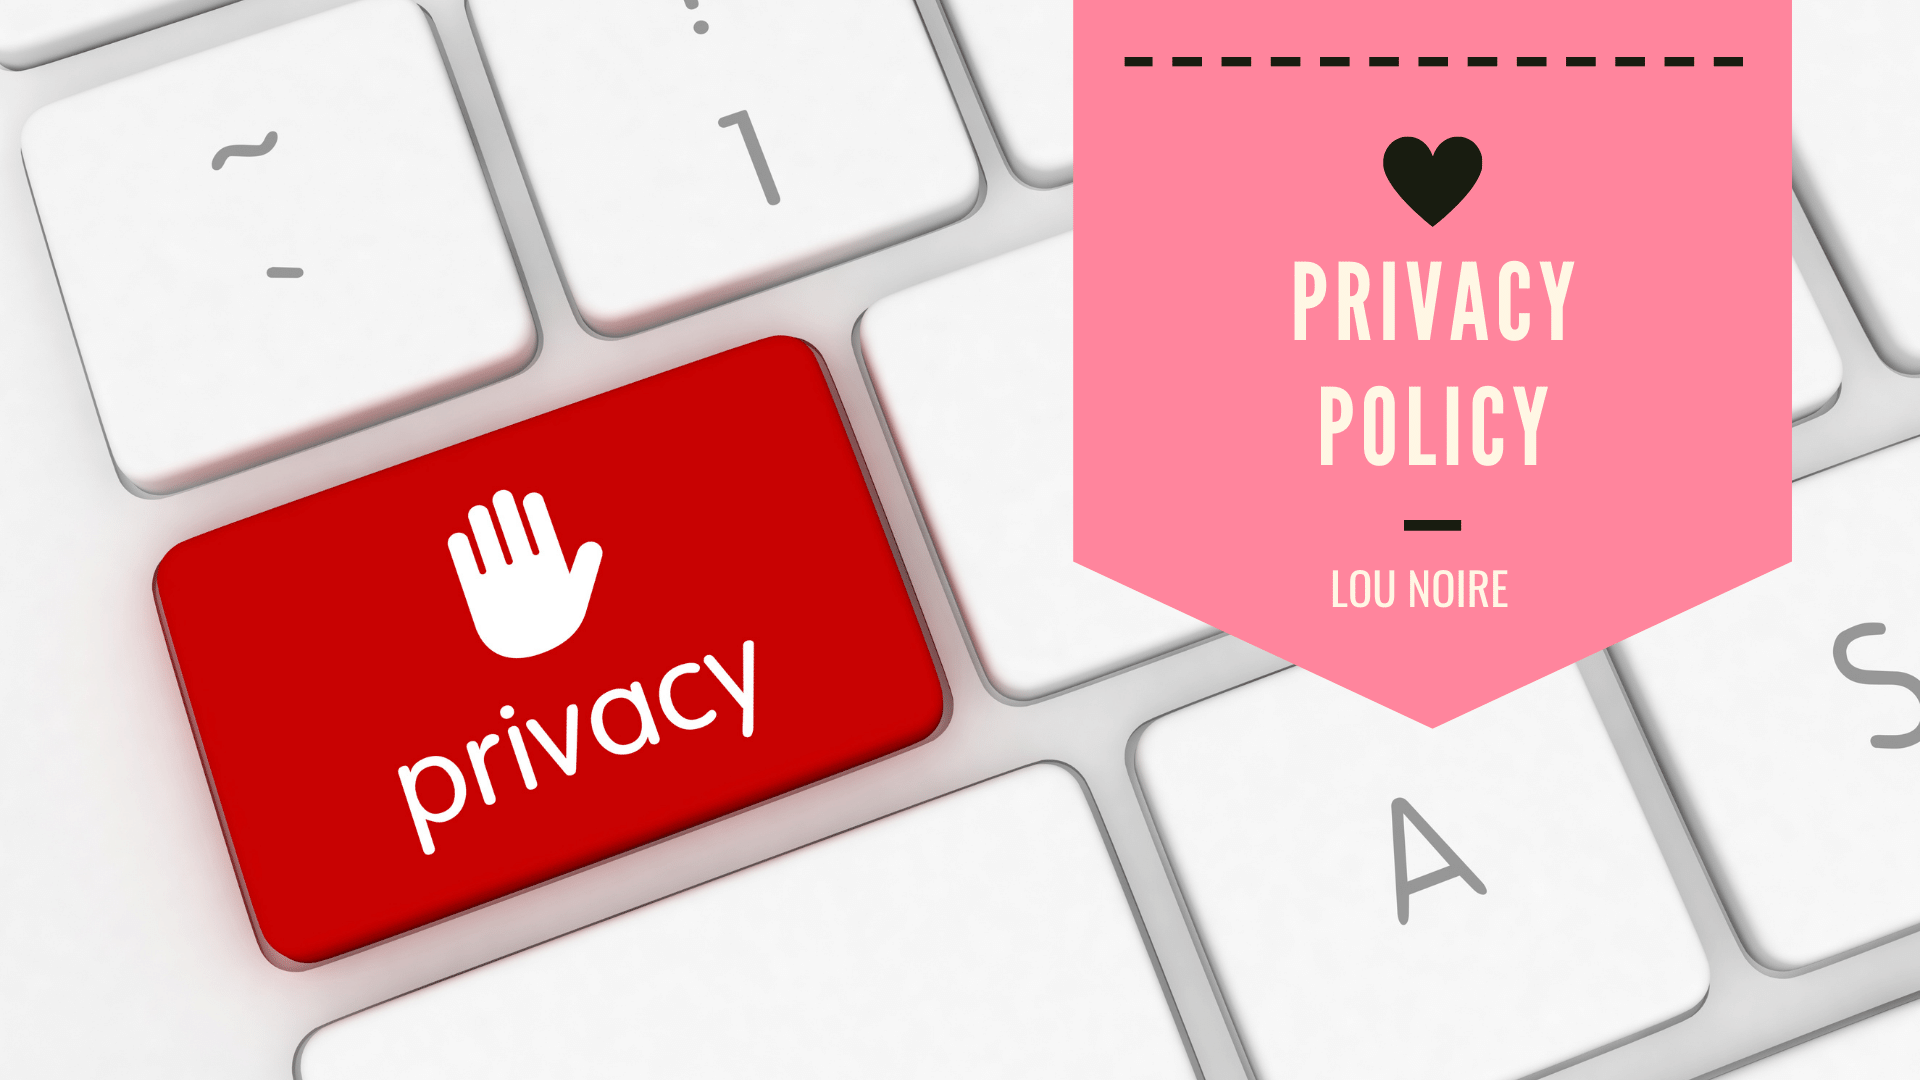 Privacy Policy - Lou Noire